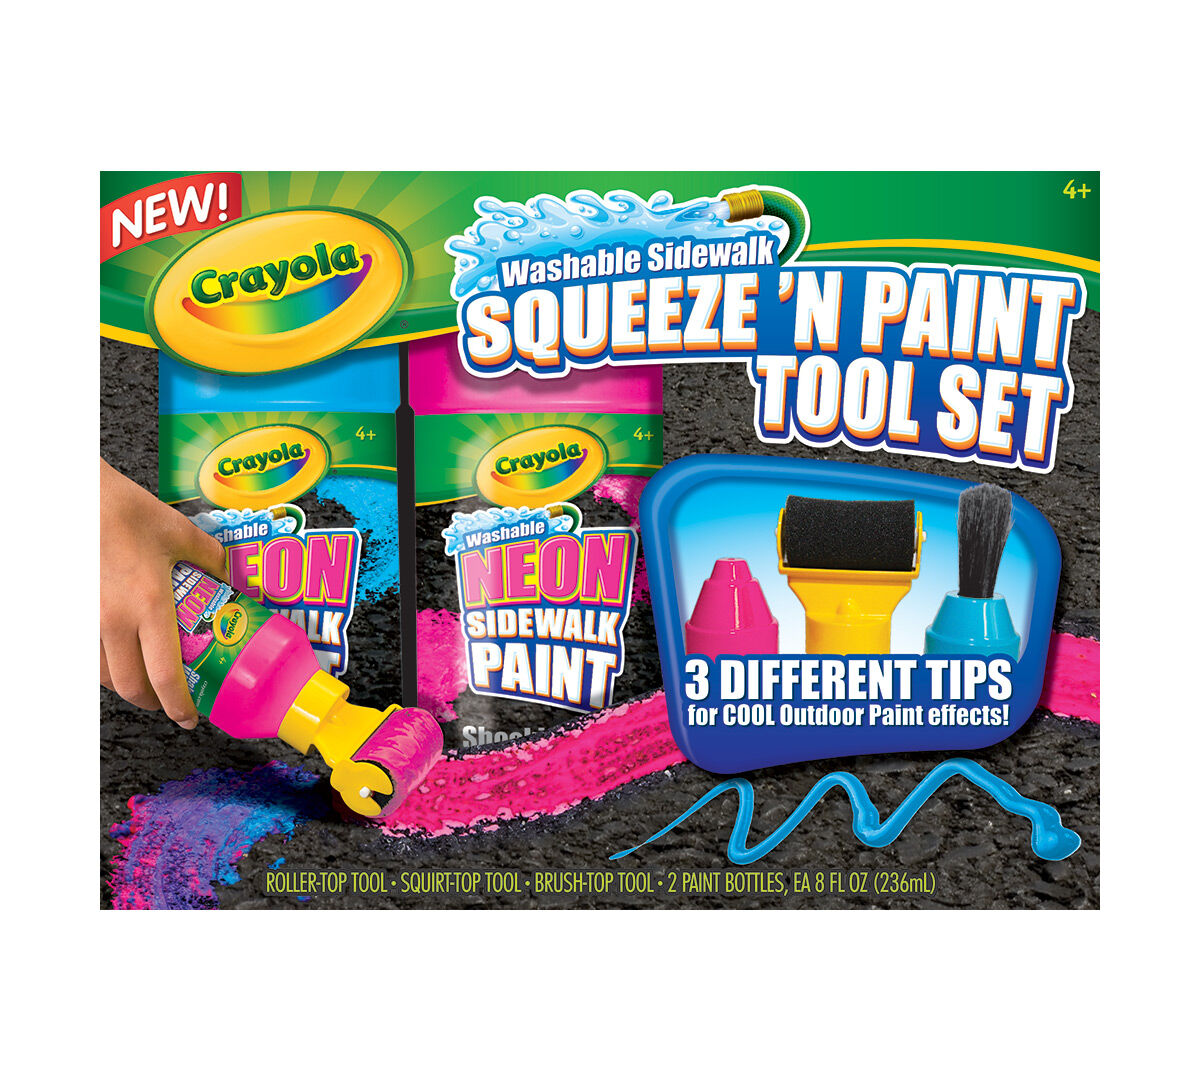 Squeeze 'N Paint Tool Set